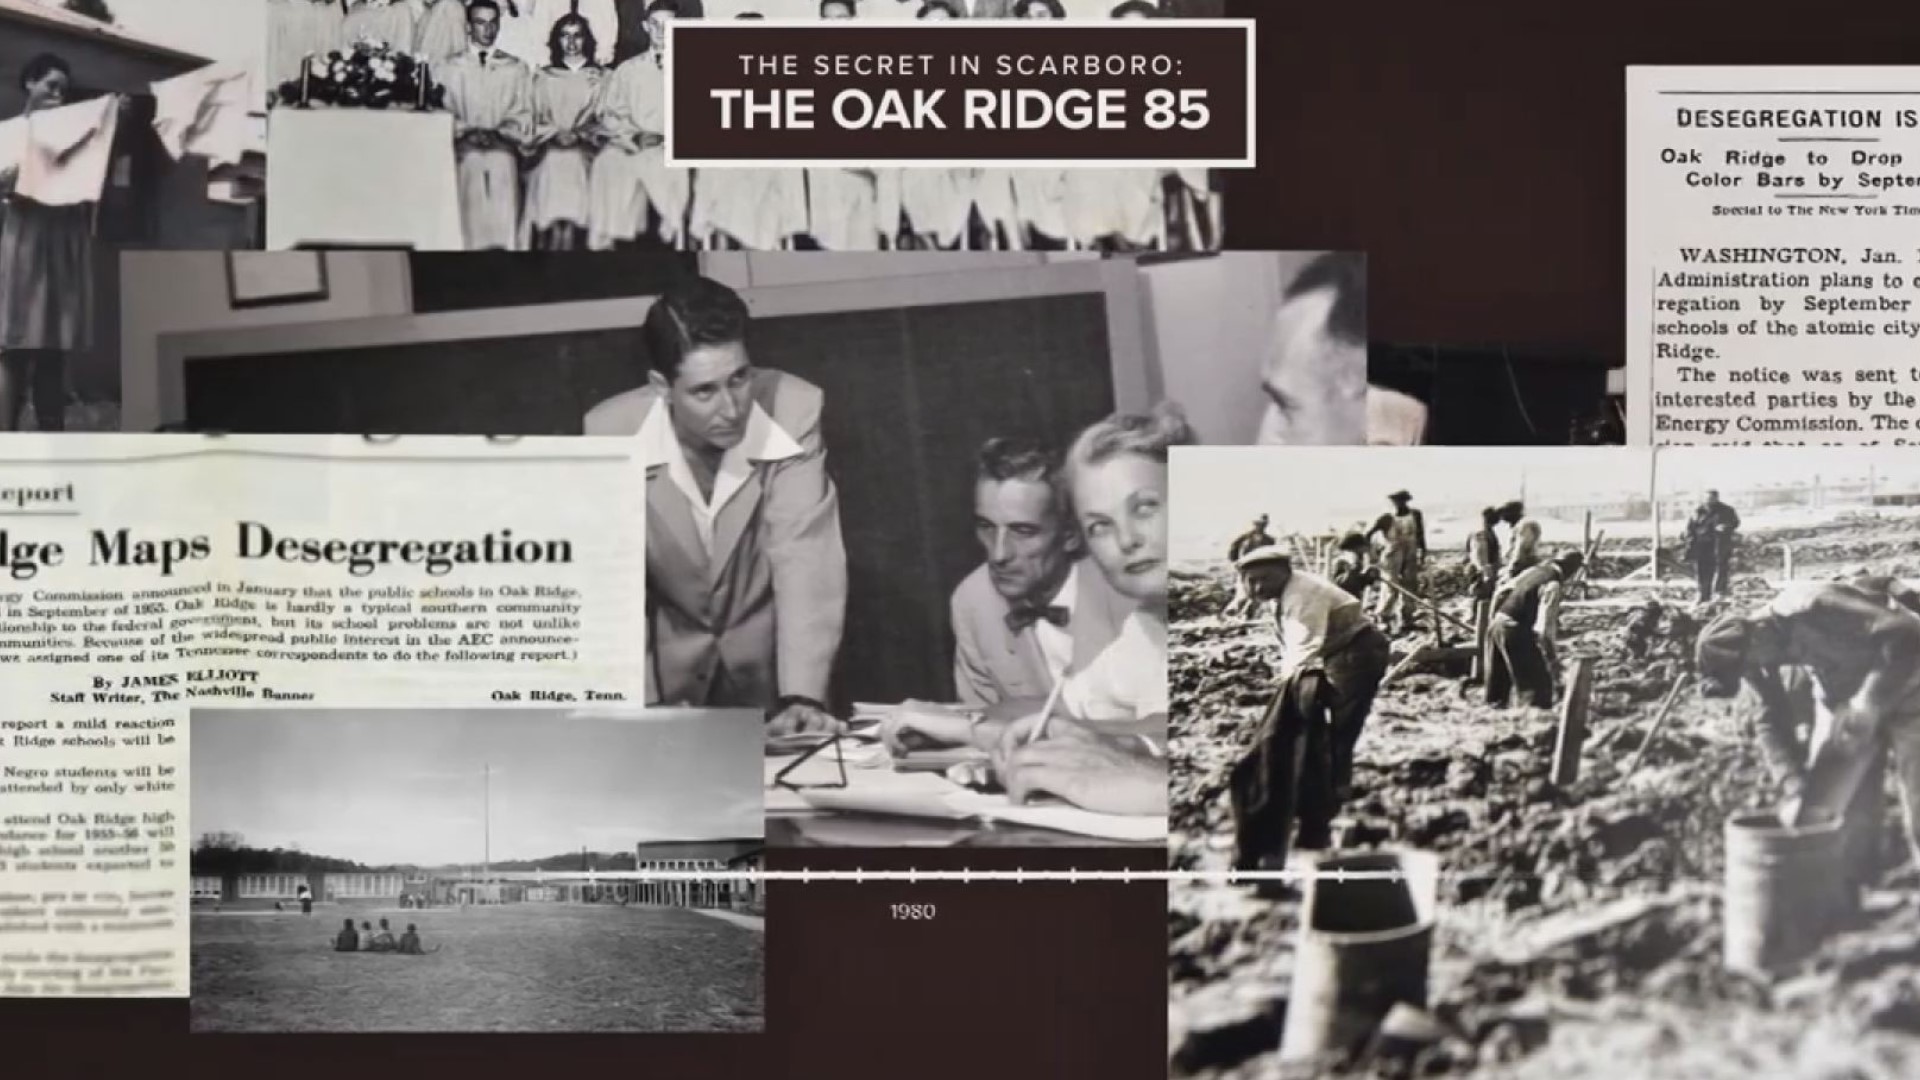 On September 6, 1955, 85 students in Oak Ridge were among the first in the country to integrate. But to this day, their stories have remained largely untold.